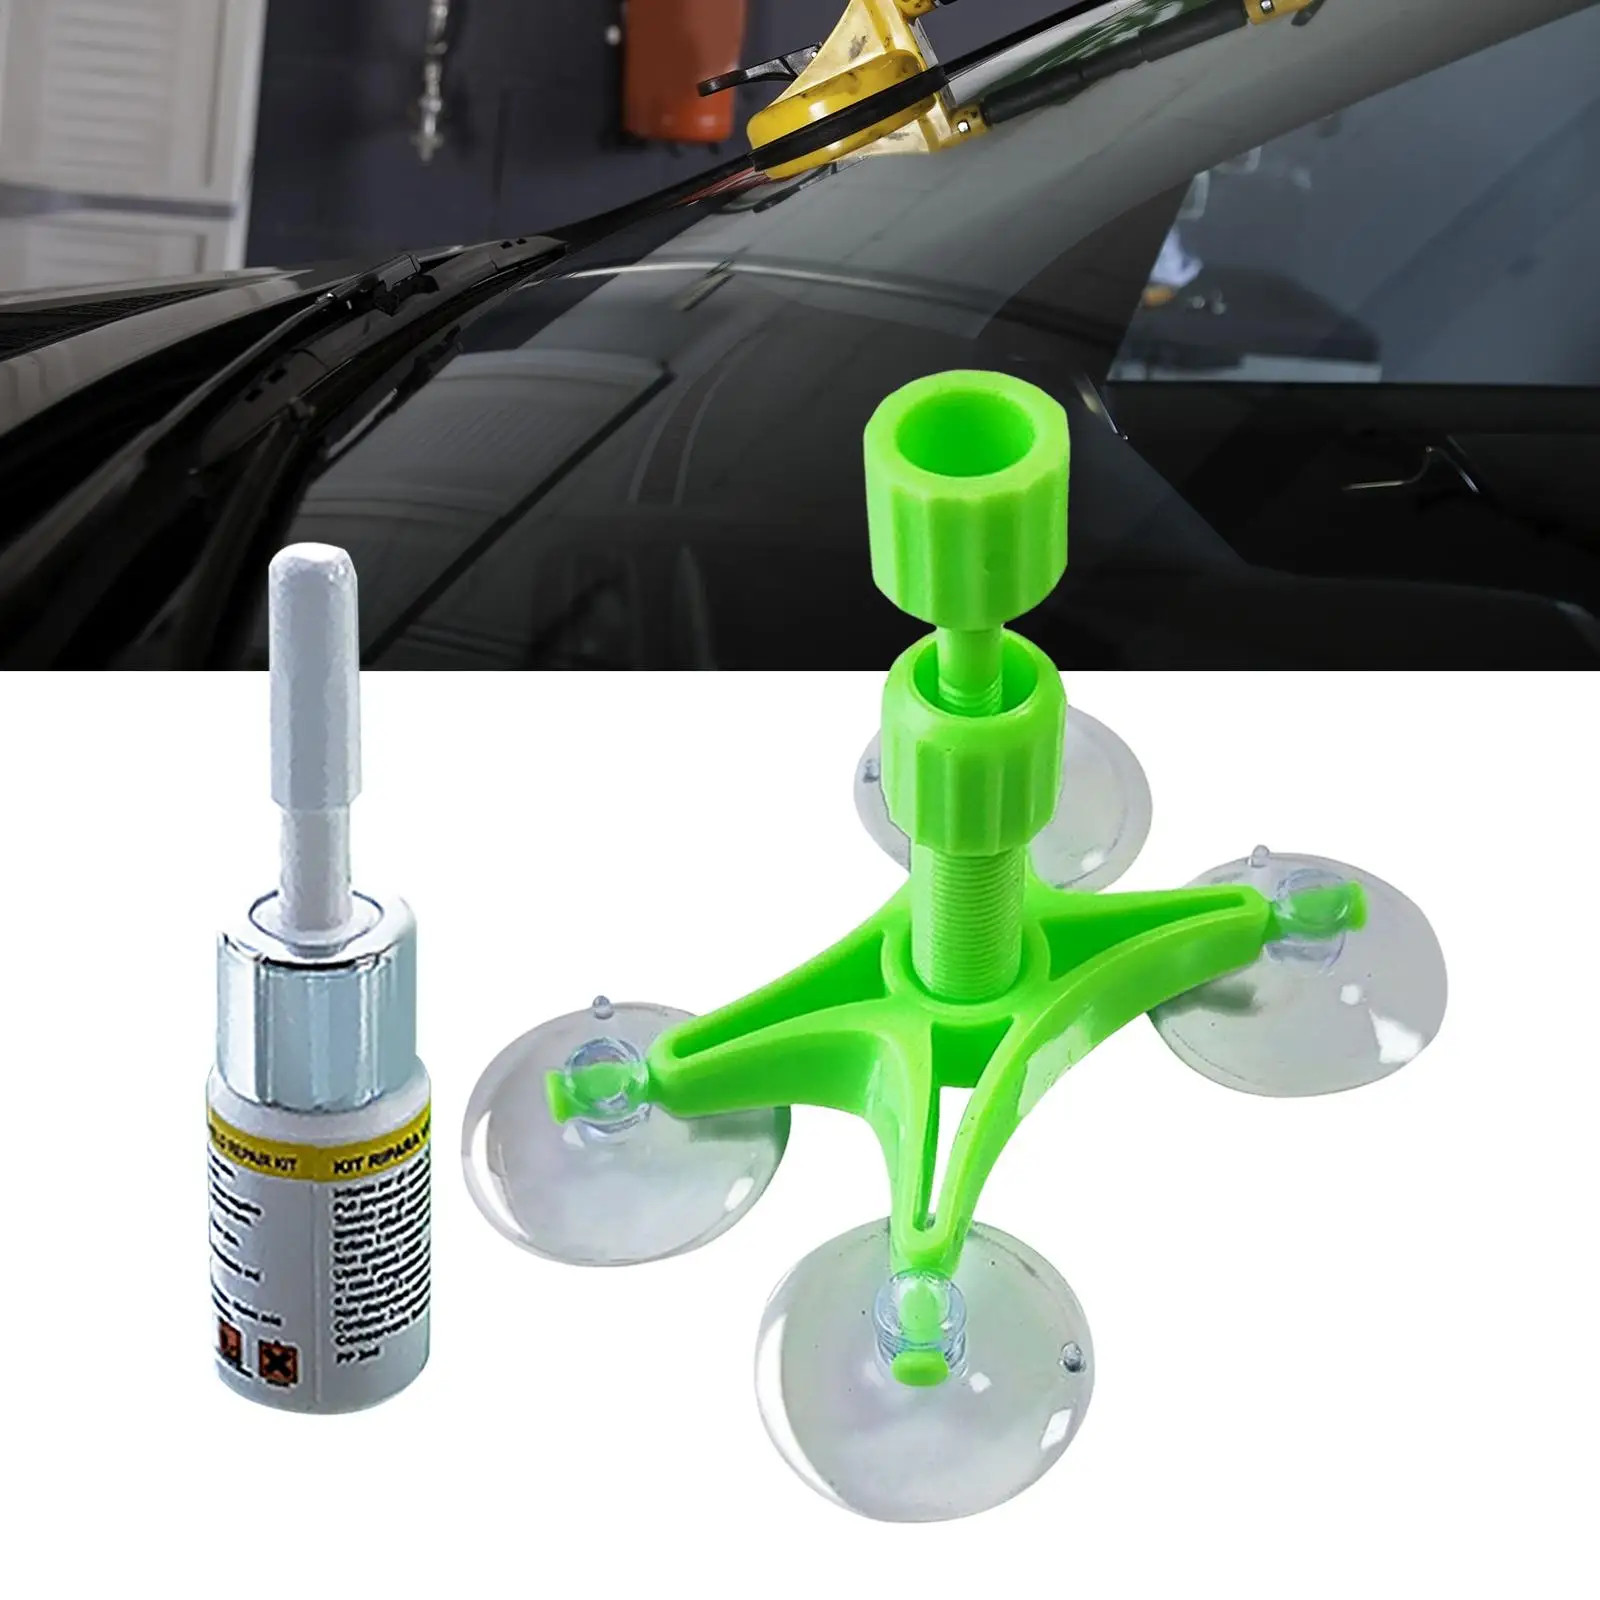 Car Auto Glass Windshield Fluid Repair Set Easy to Operate DIY Widely Use